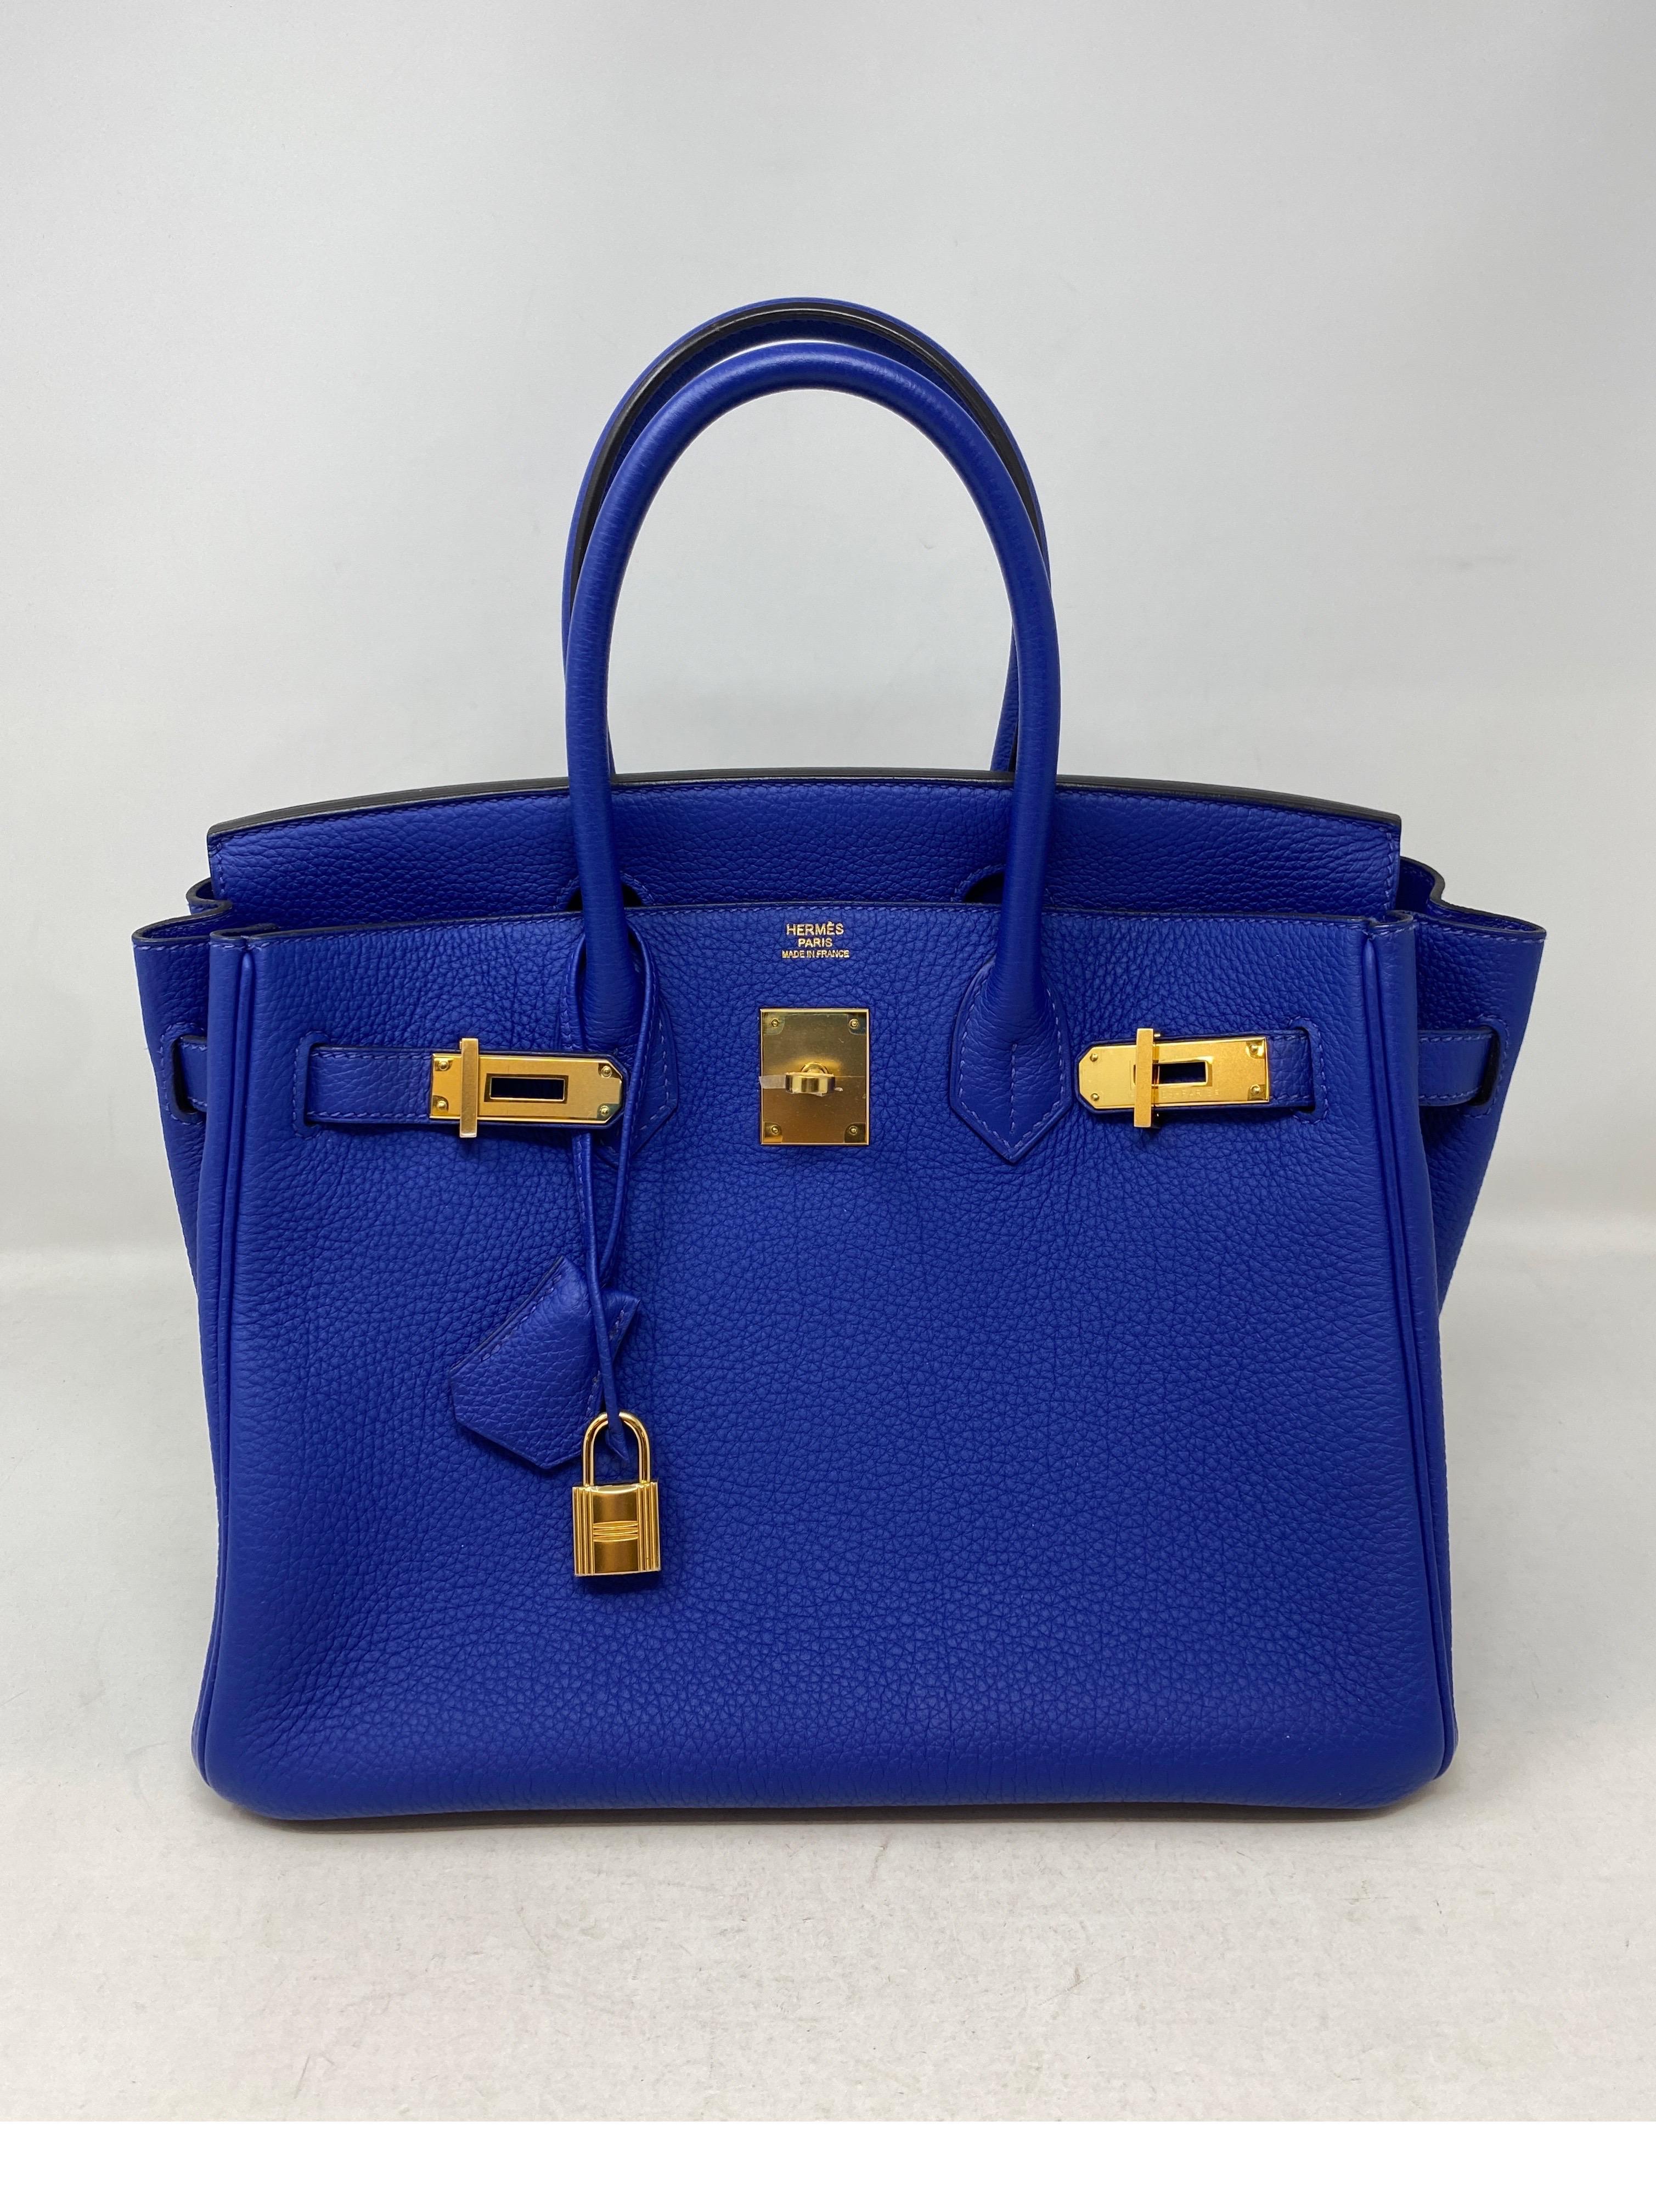 Hermes Blue Electrique 30 Bag. Gold hardware. Excellent condition. Looks like new. Vibrant blue color bag. Rare size and color. Includes clochette, lock, keys, and dust cover. Guaranteed authentic. 